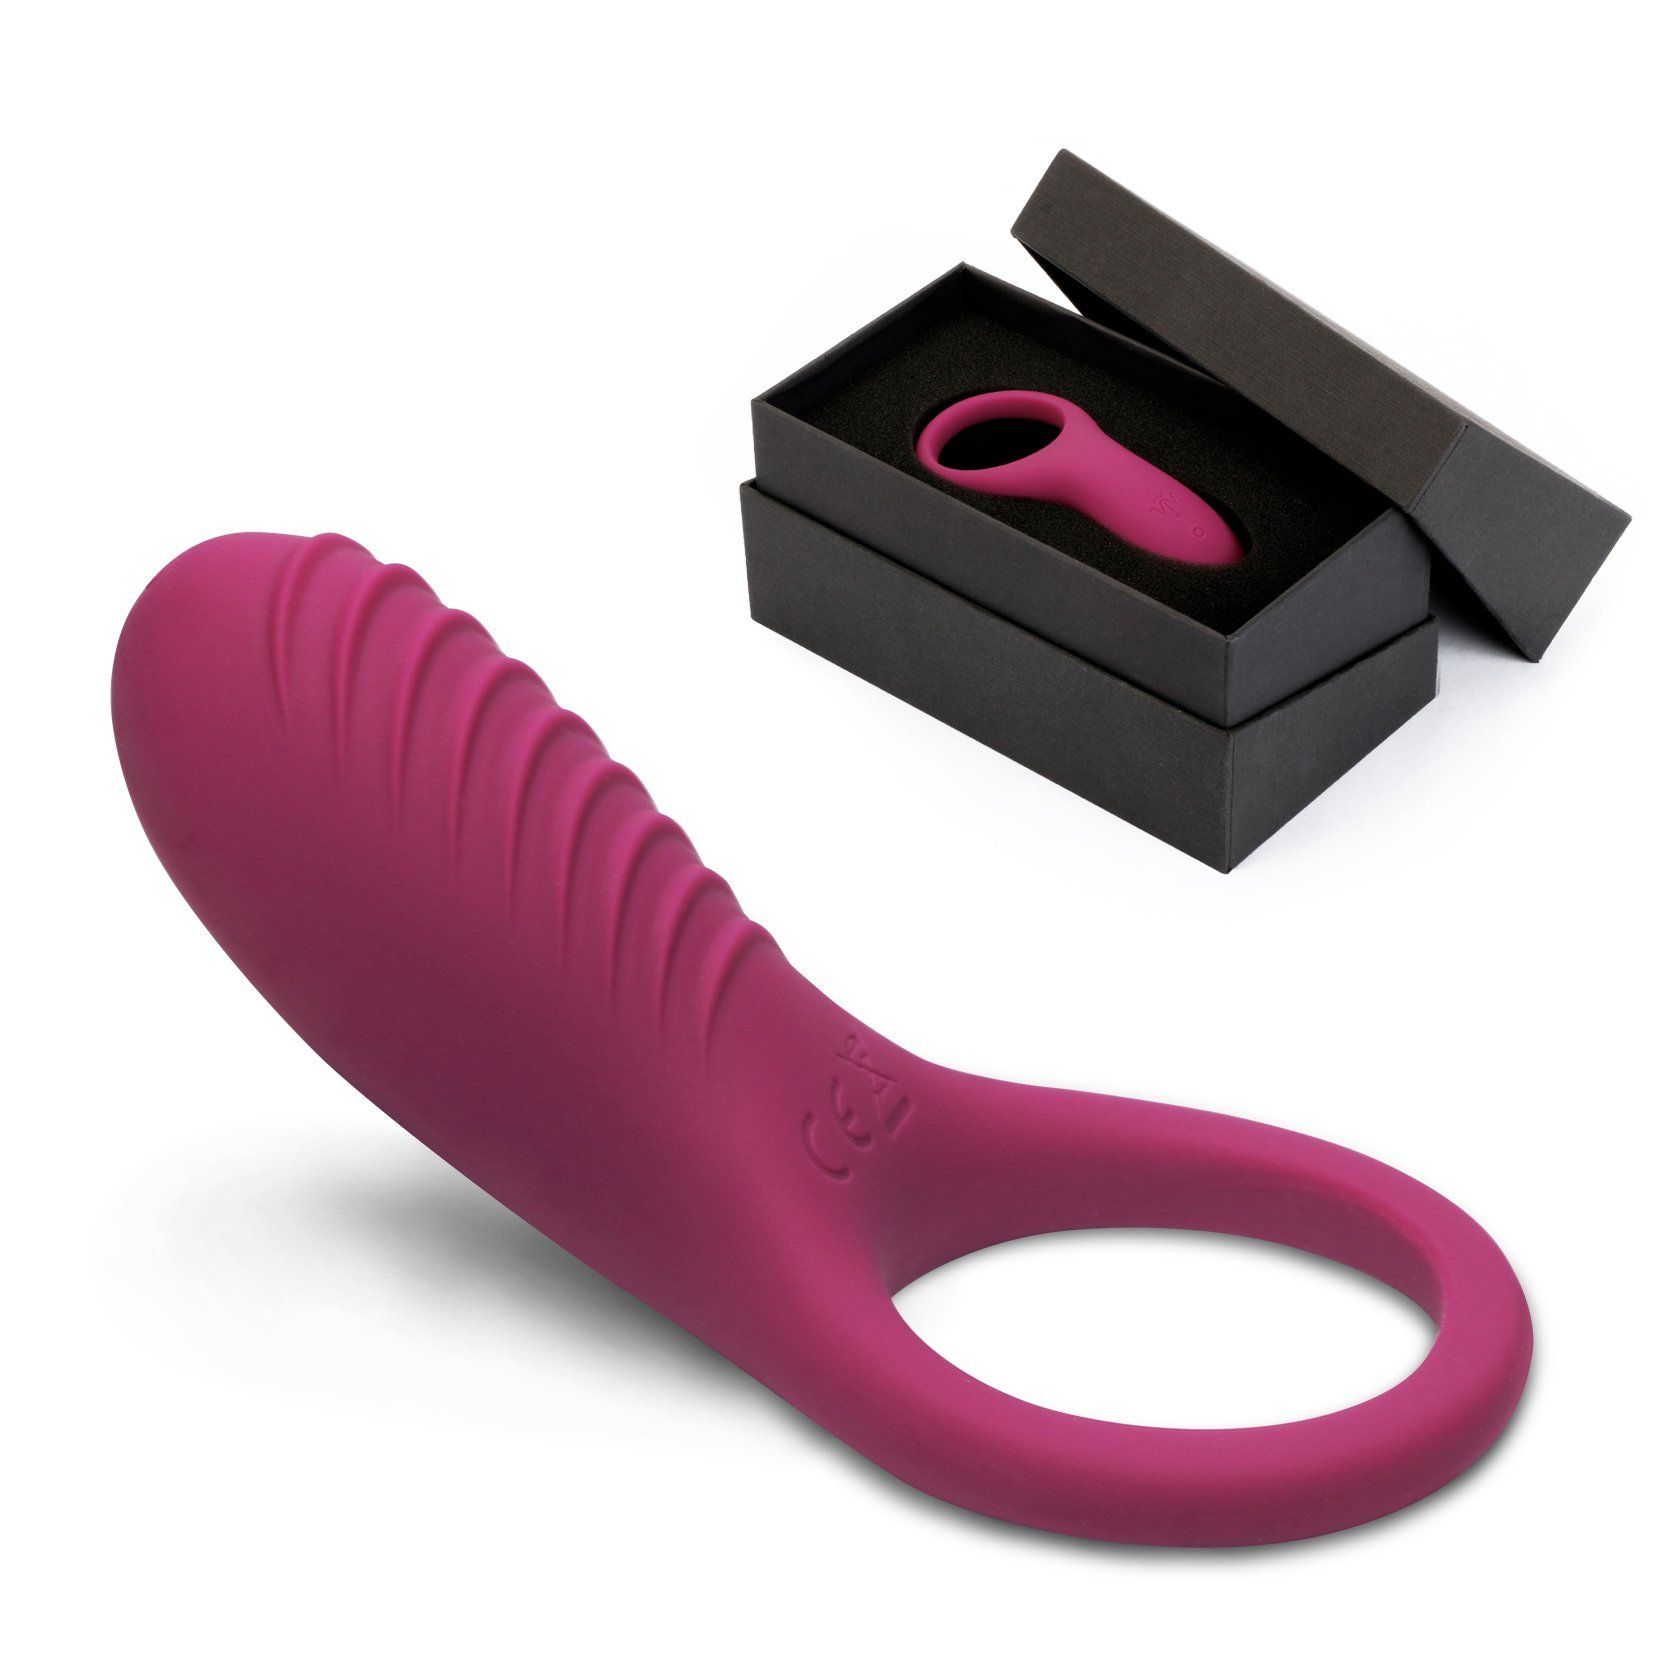 Vibrator that can be worn with partner